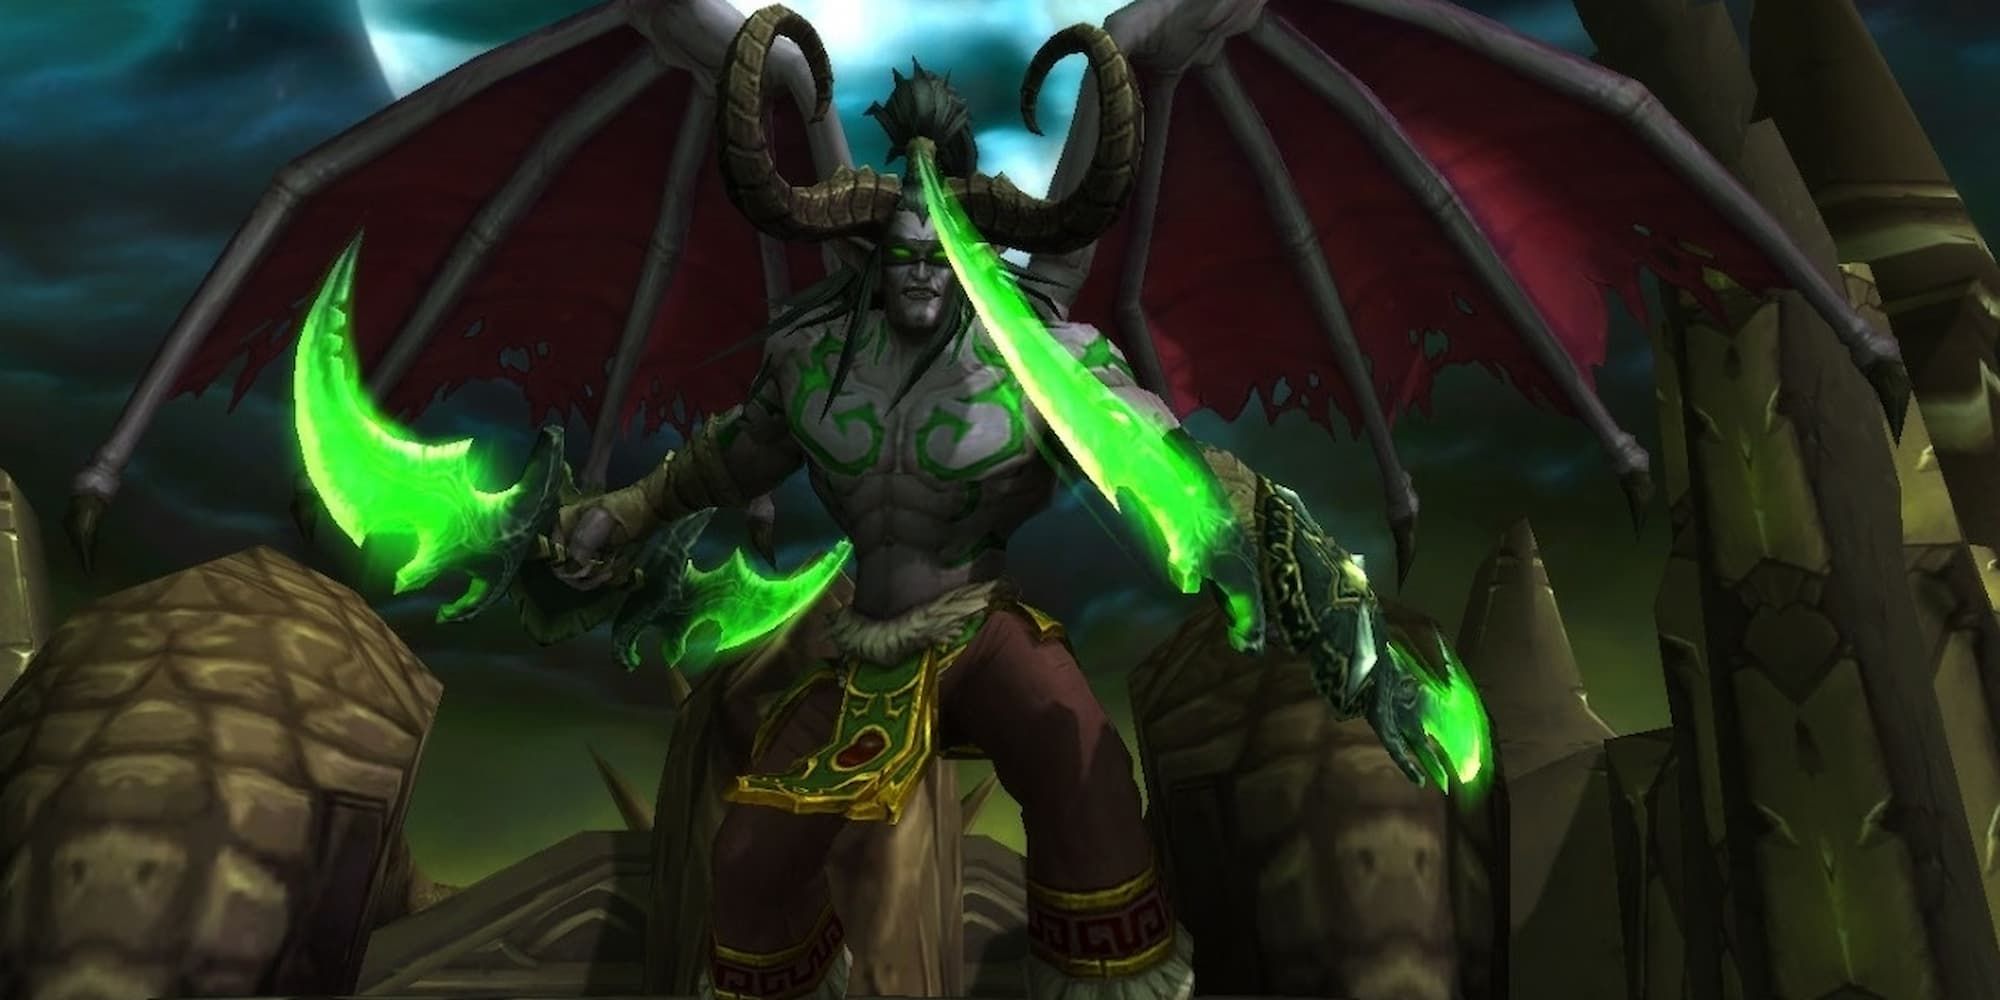 Illidan Stormrage prepares for battle with two green double-bladed swords in World of Warcraft